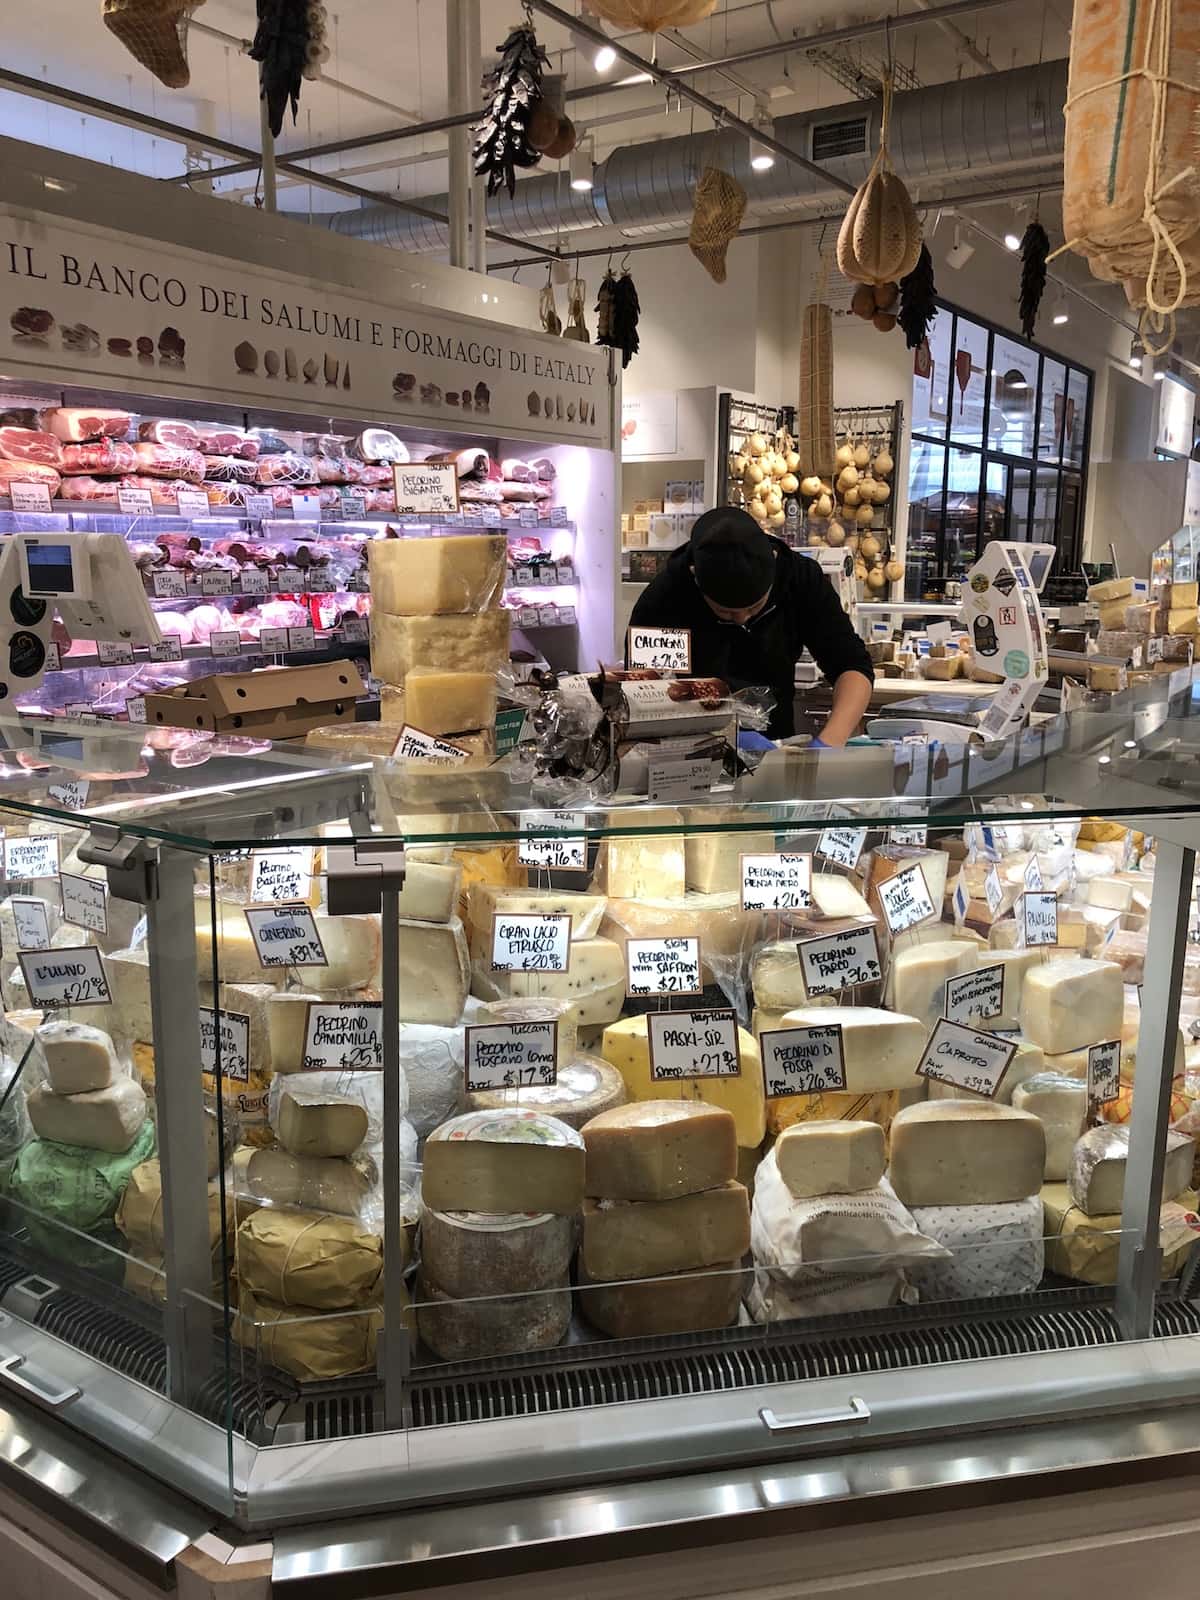 Enjoy Illinois: Exploring Chicago and the Magnificent Mile - Eataly